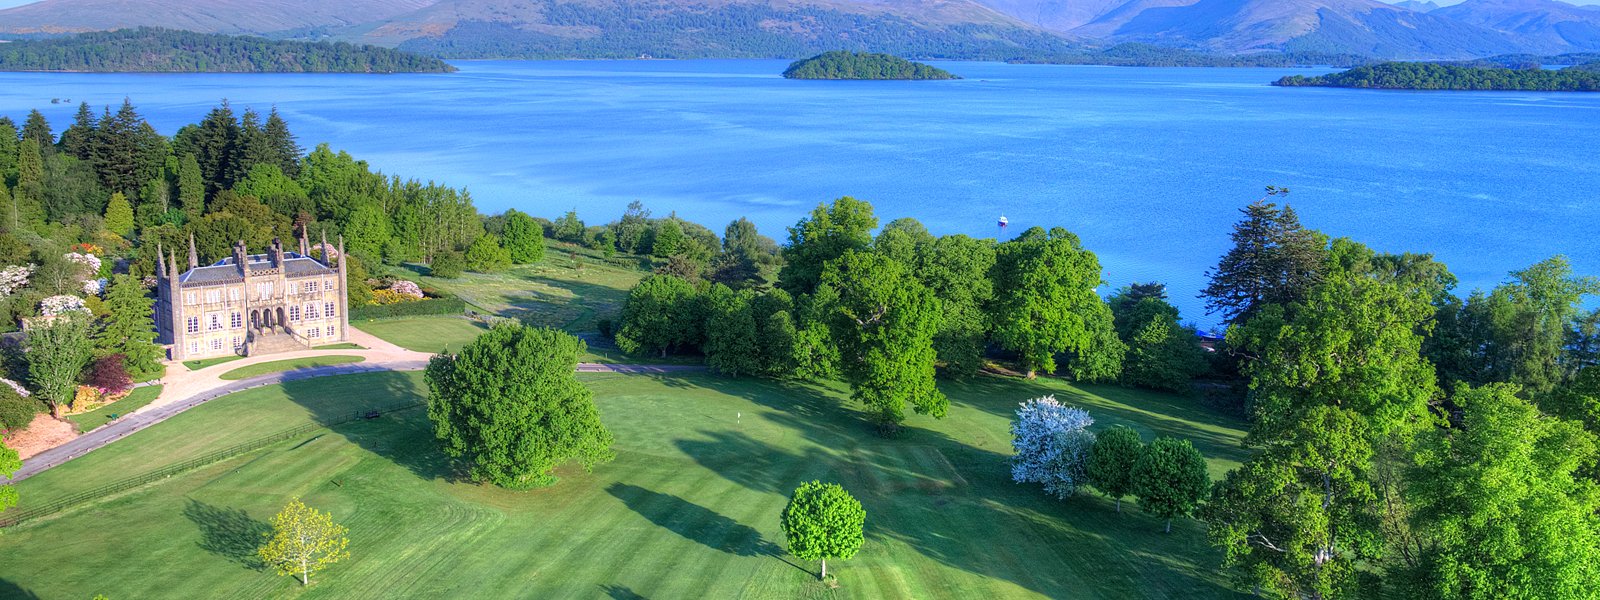 Aerial shot of Ross Priory and grounds, including Loch Lomond. Image courtesy of Aye in the Sky Aerial Photography